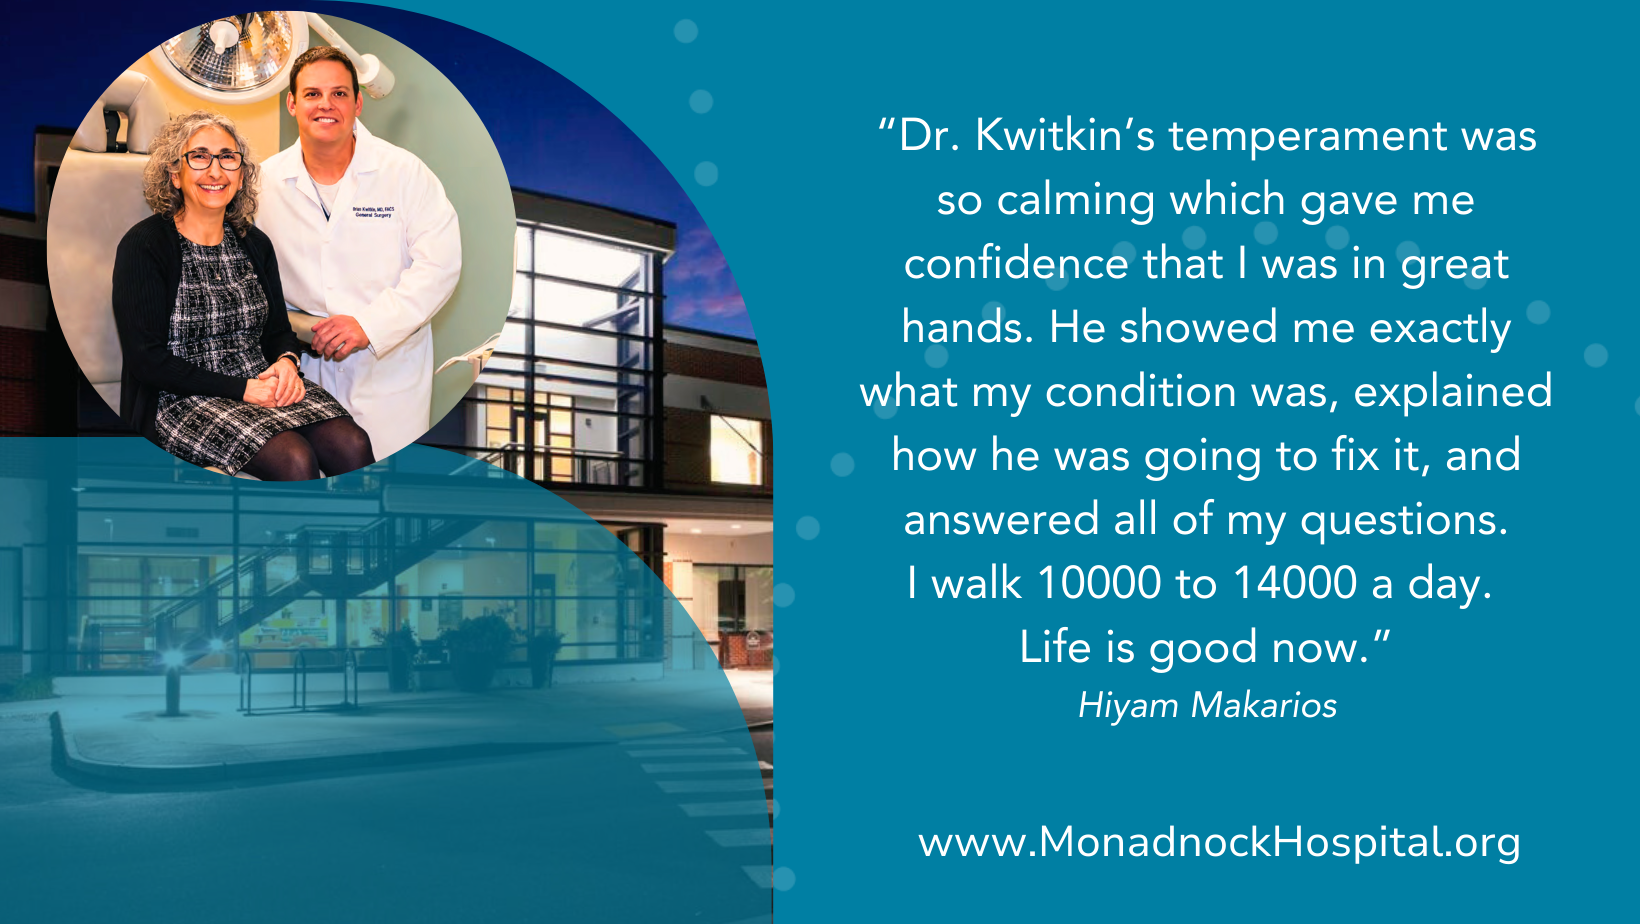 Hiyam Makarios Dr. Kwitkin’s temperament was so calming which gave me confidence that I was in great hands. He showed me exactly what my condition was, explained how he was going to fix it, and answered all of my questions. I walk 10000 to 14000 a day Life is good now.